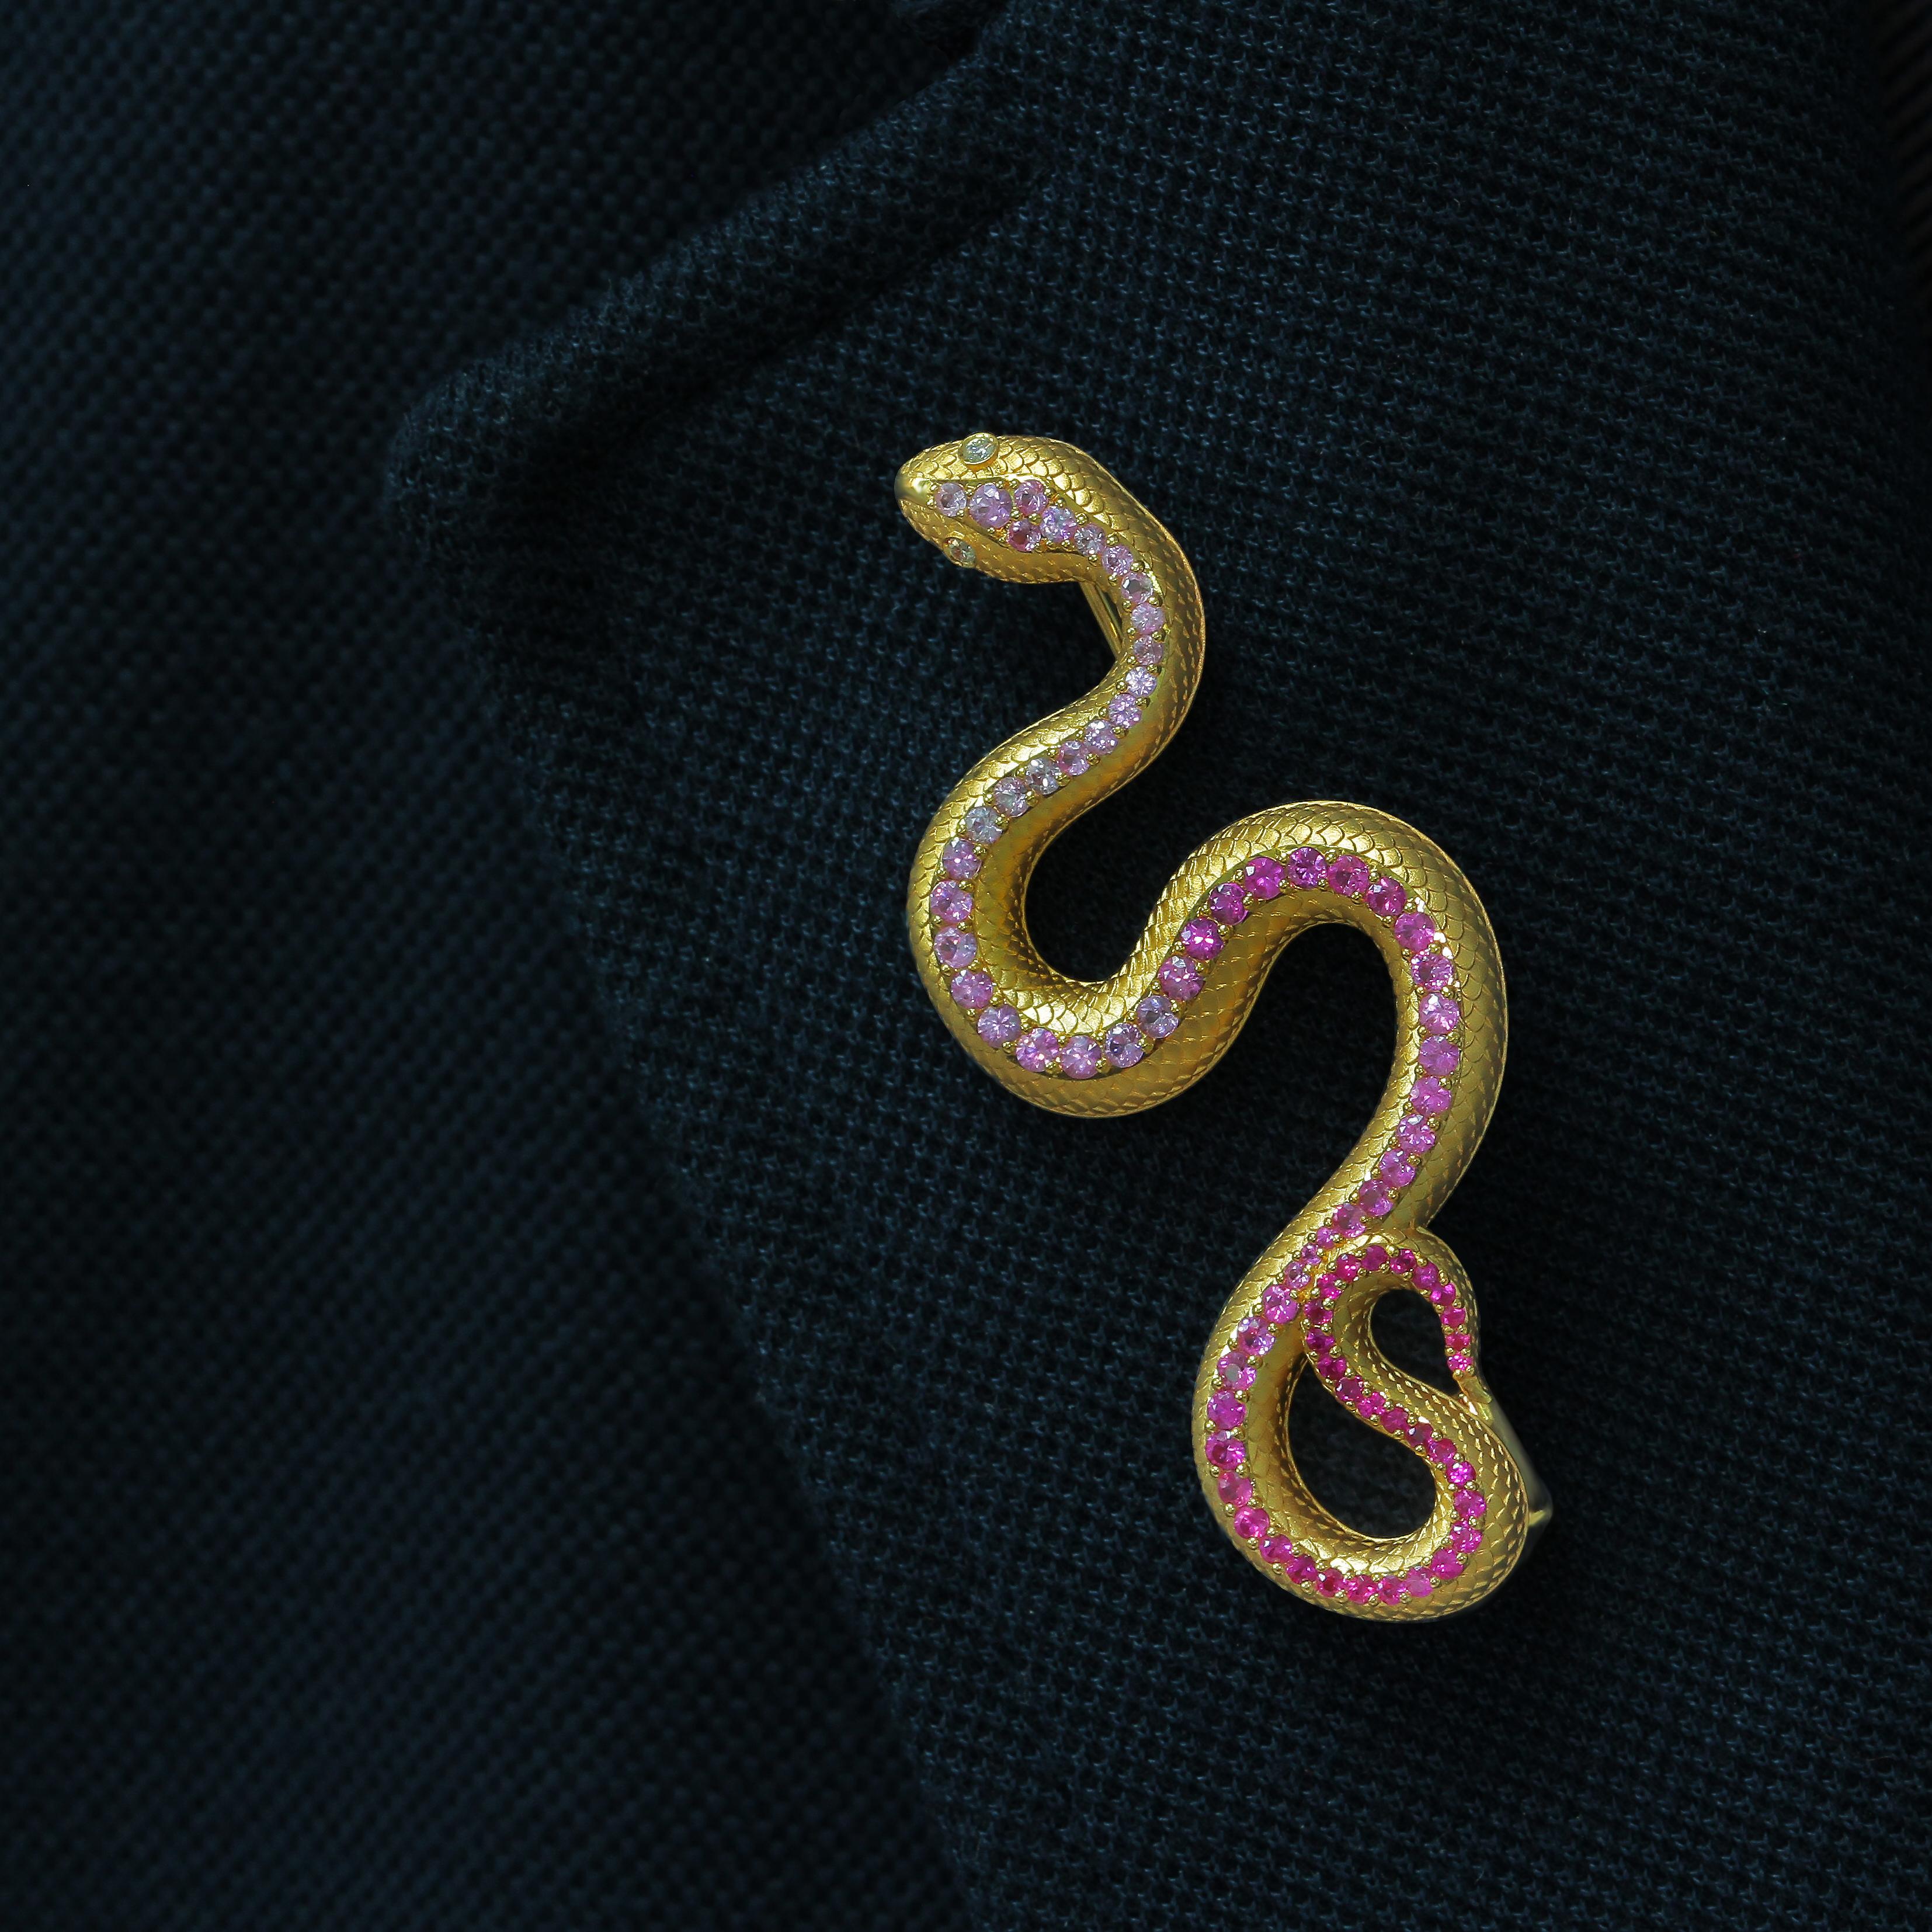 Pink Sapphire Diamonds 18 Karat Yellow Gold Snake Brooch

Just take a look on this hi-detailed Brooch, distributes all the wisdom of the Snake. Carefully selected color graduation from Pink Sapphires to Diamonds gives the impression that Snake is